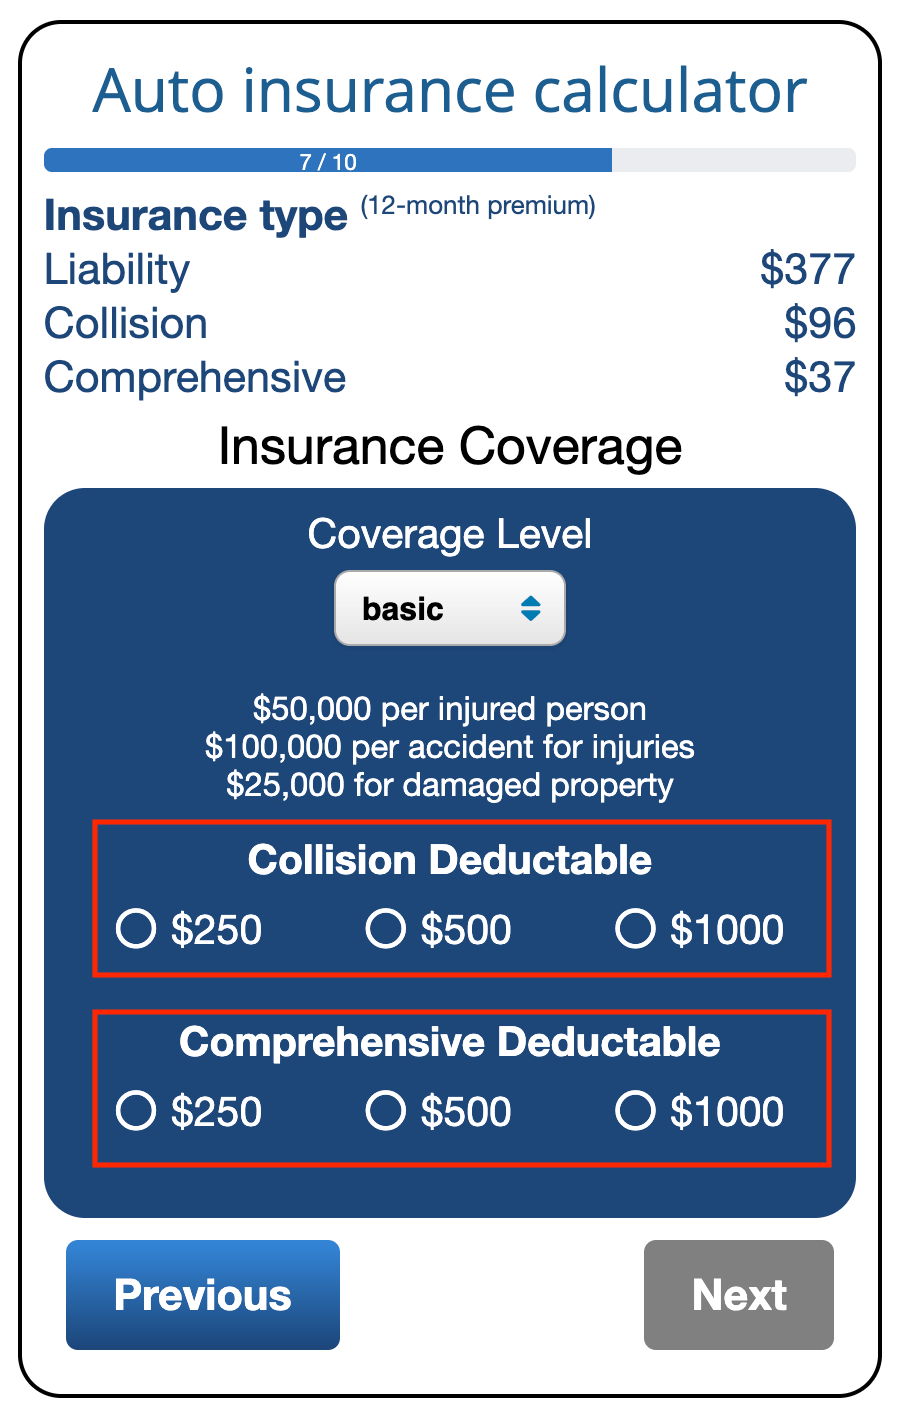 How much is car insurance with a high insurance deductible?